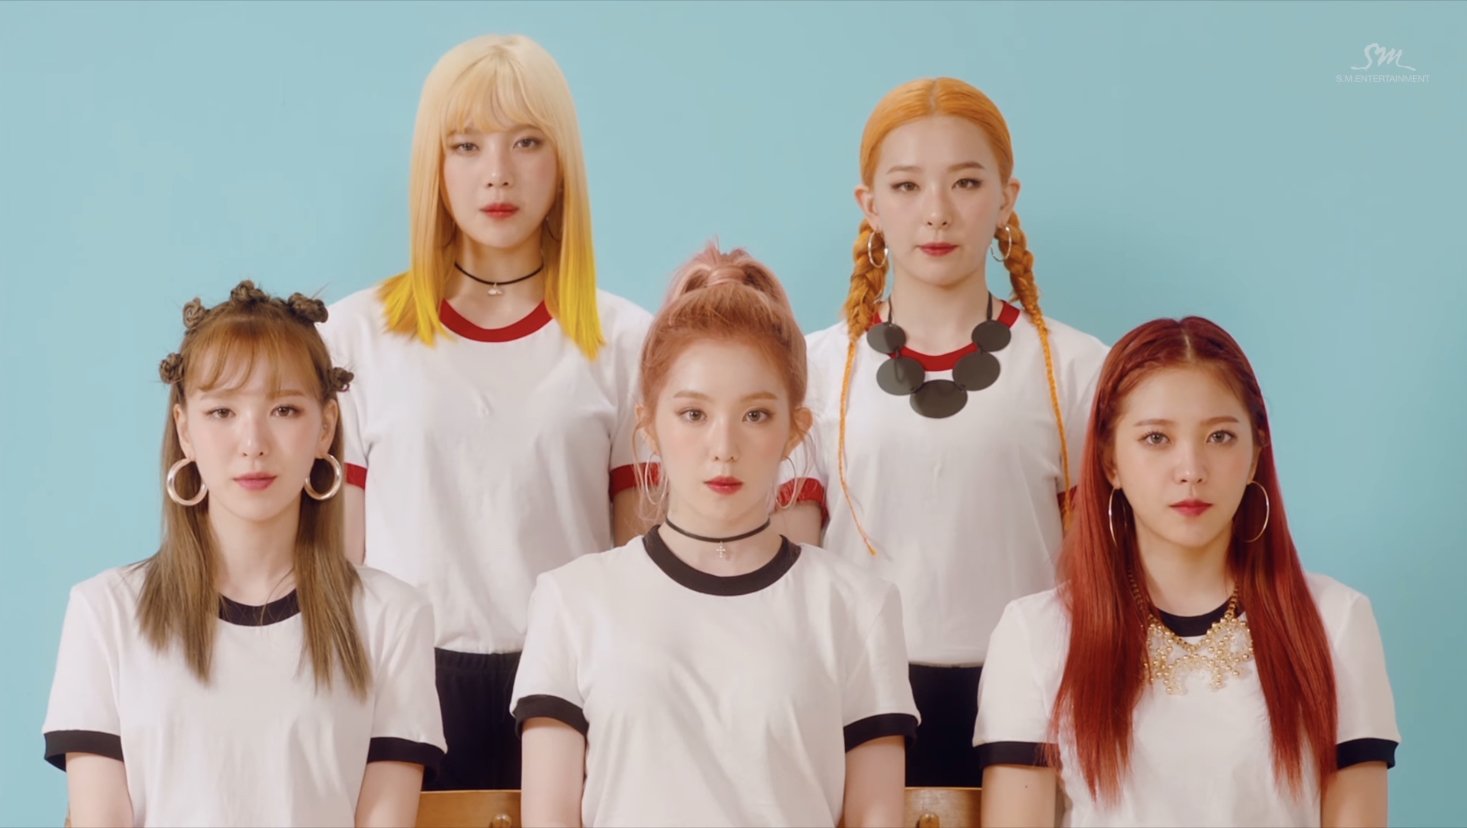 russian roulette - red velvet  Kpop fashion outfits, Kpop outfits, Dance  outfits